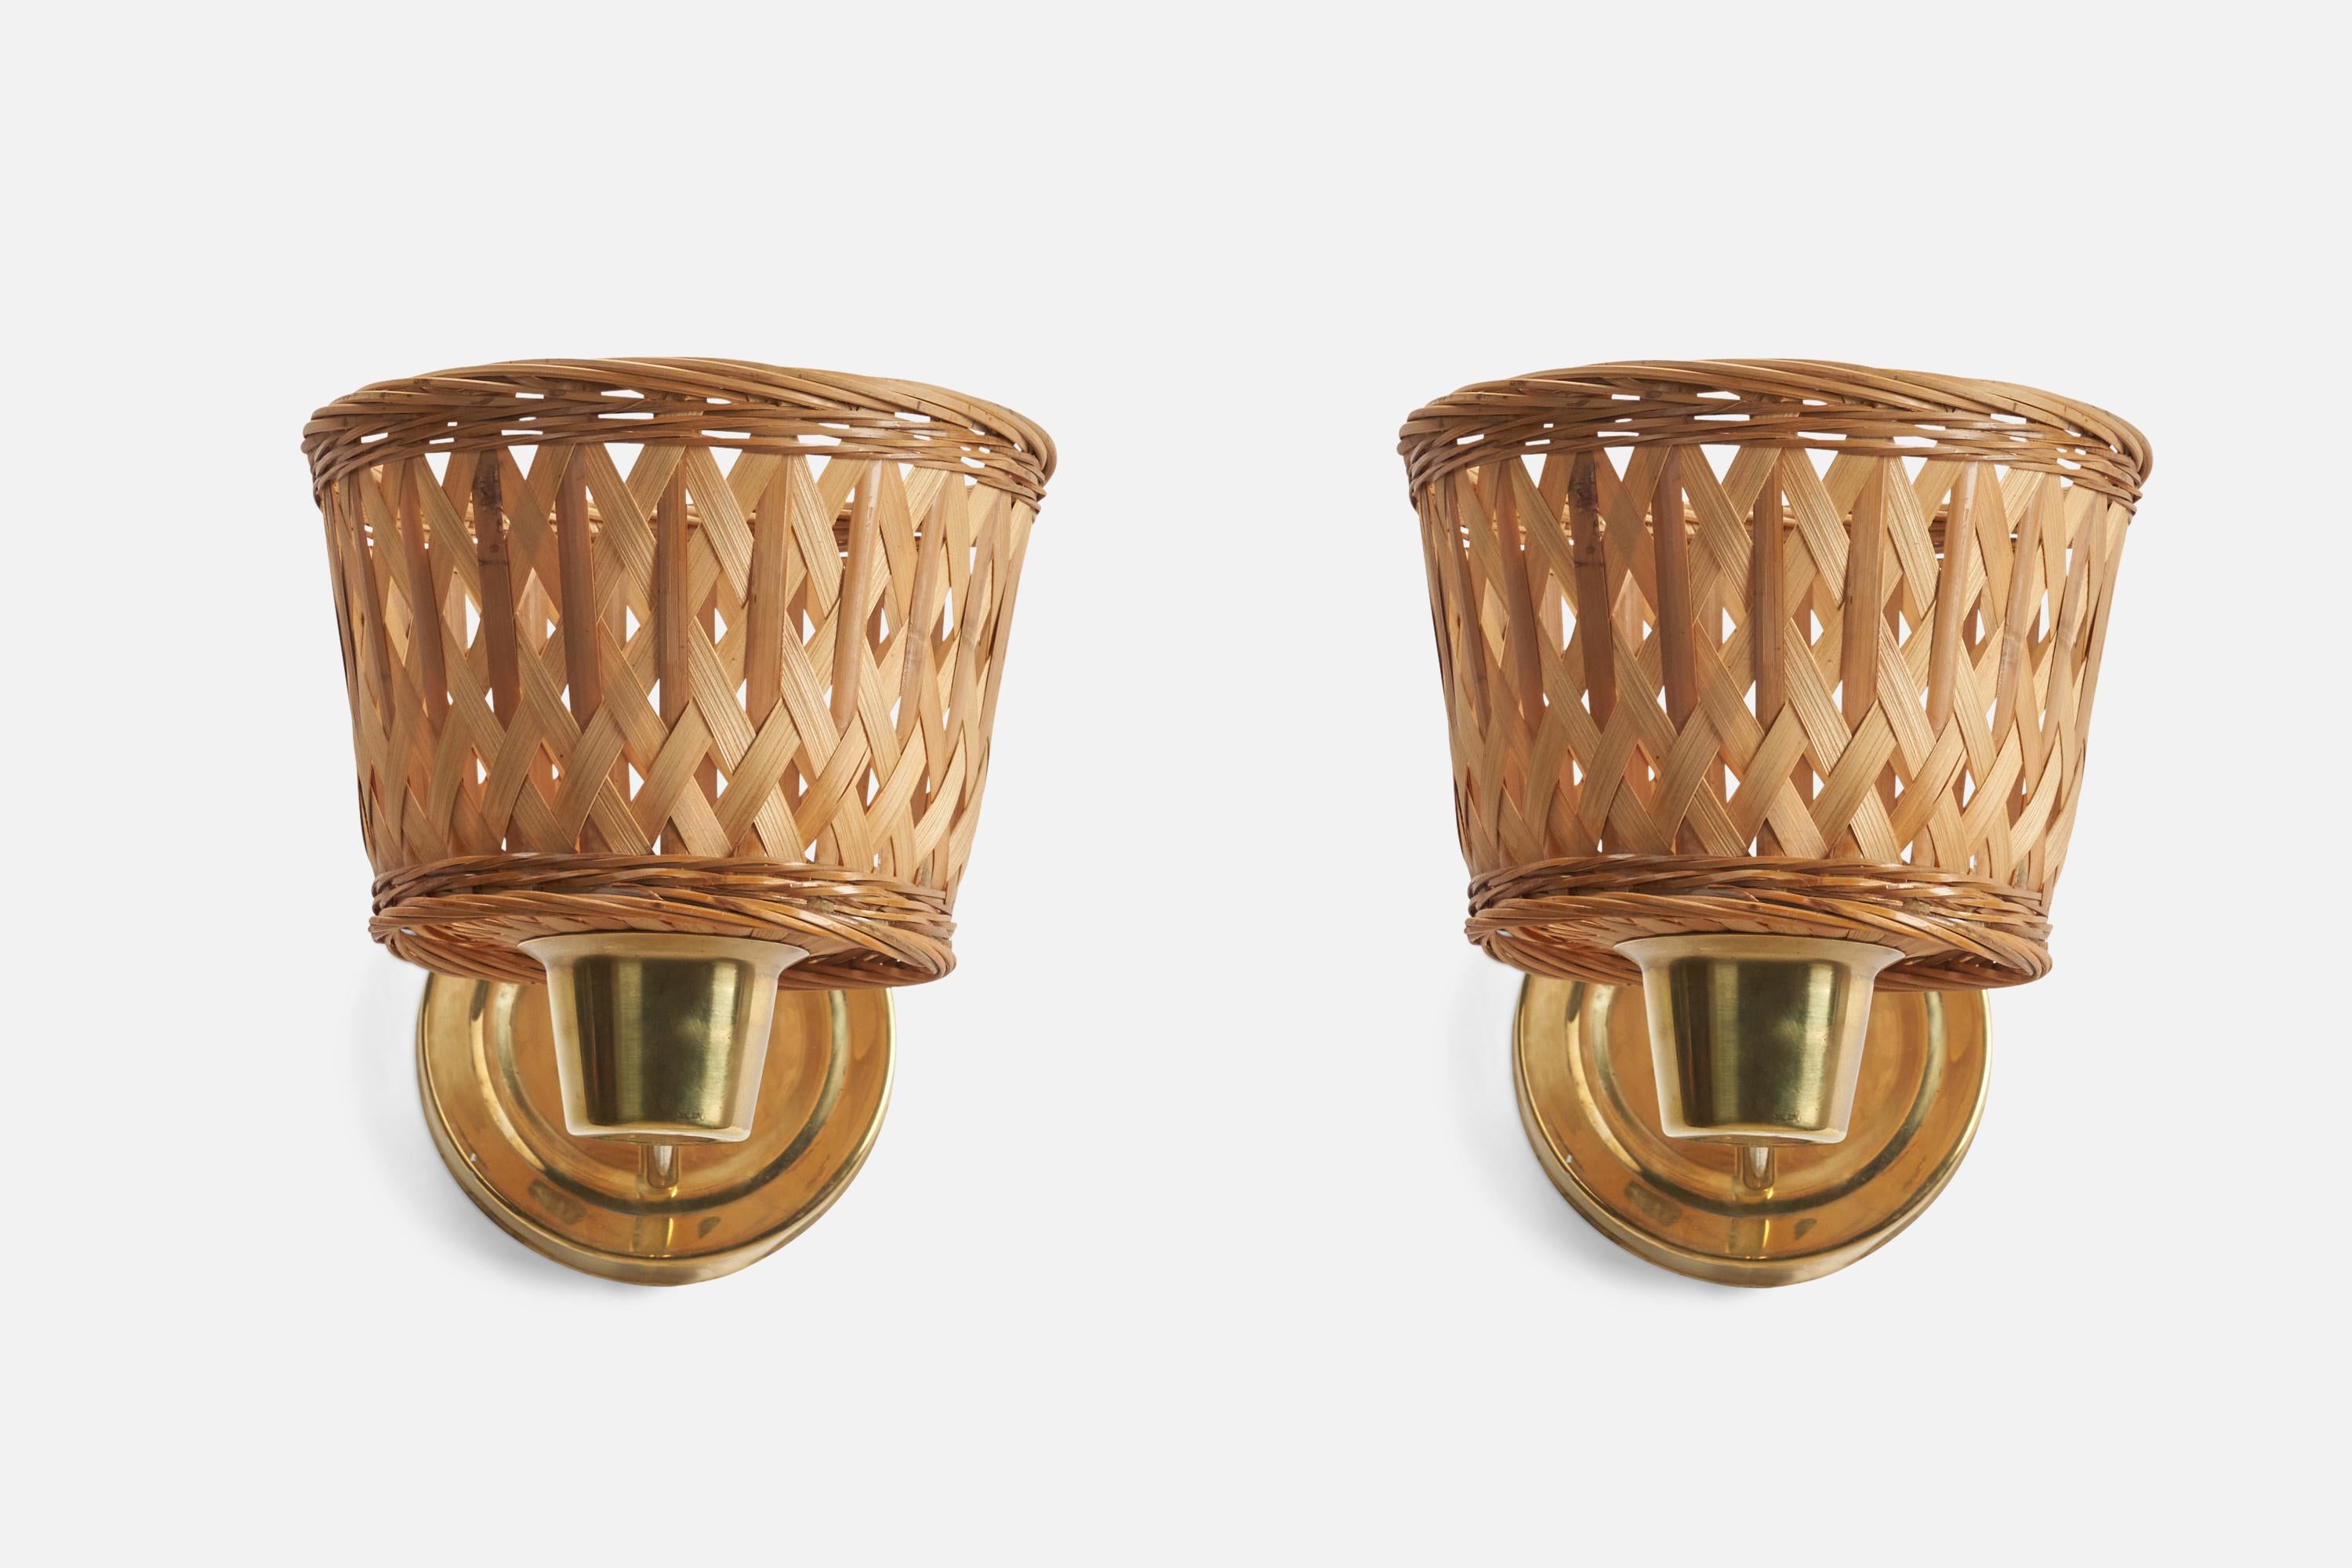 A pair of brass and rattan wall lights designed and produced by a Swedish Designer, Sweden, 1970s.

Dimensions of Back Plate (inches) : 5.1 x 5.1 x 0.7 (Height x Width x Depth)

Sockets take E-14 bulbs.

There is no maximum wattage stated on